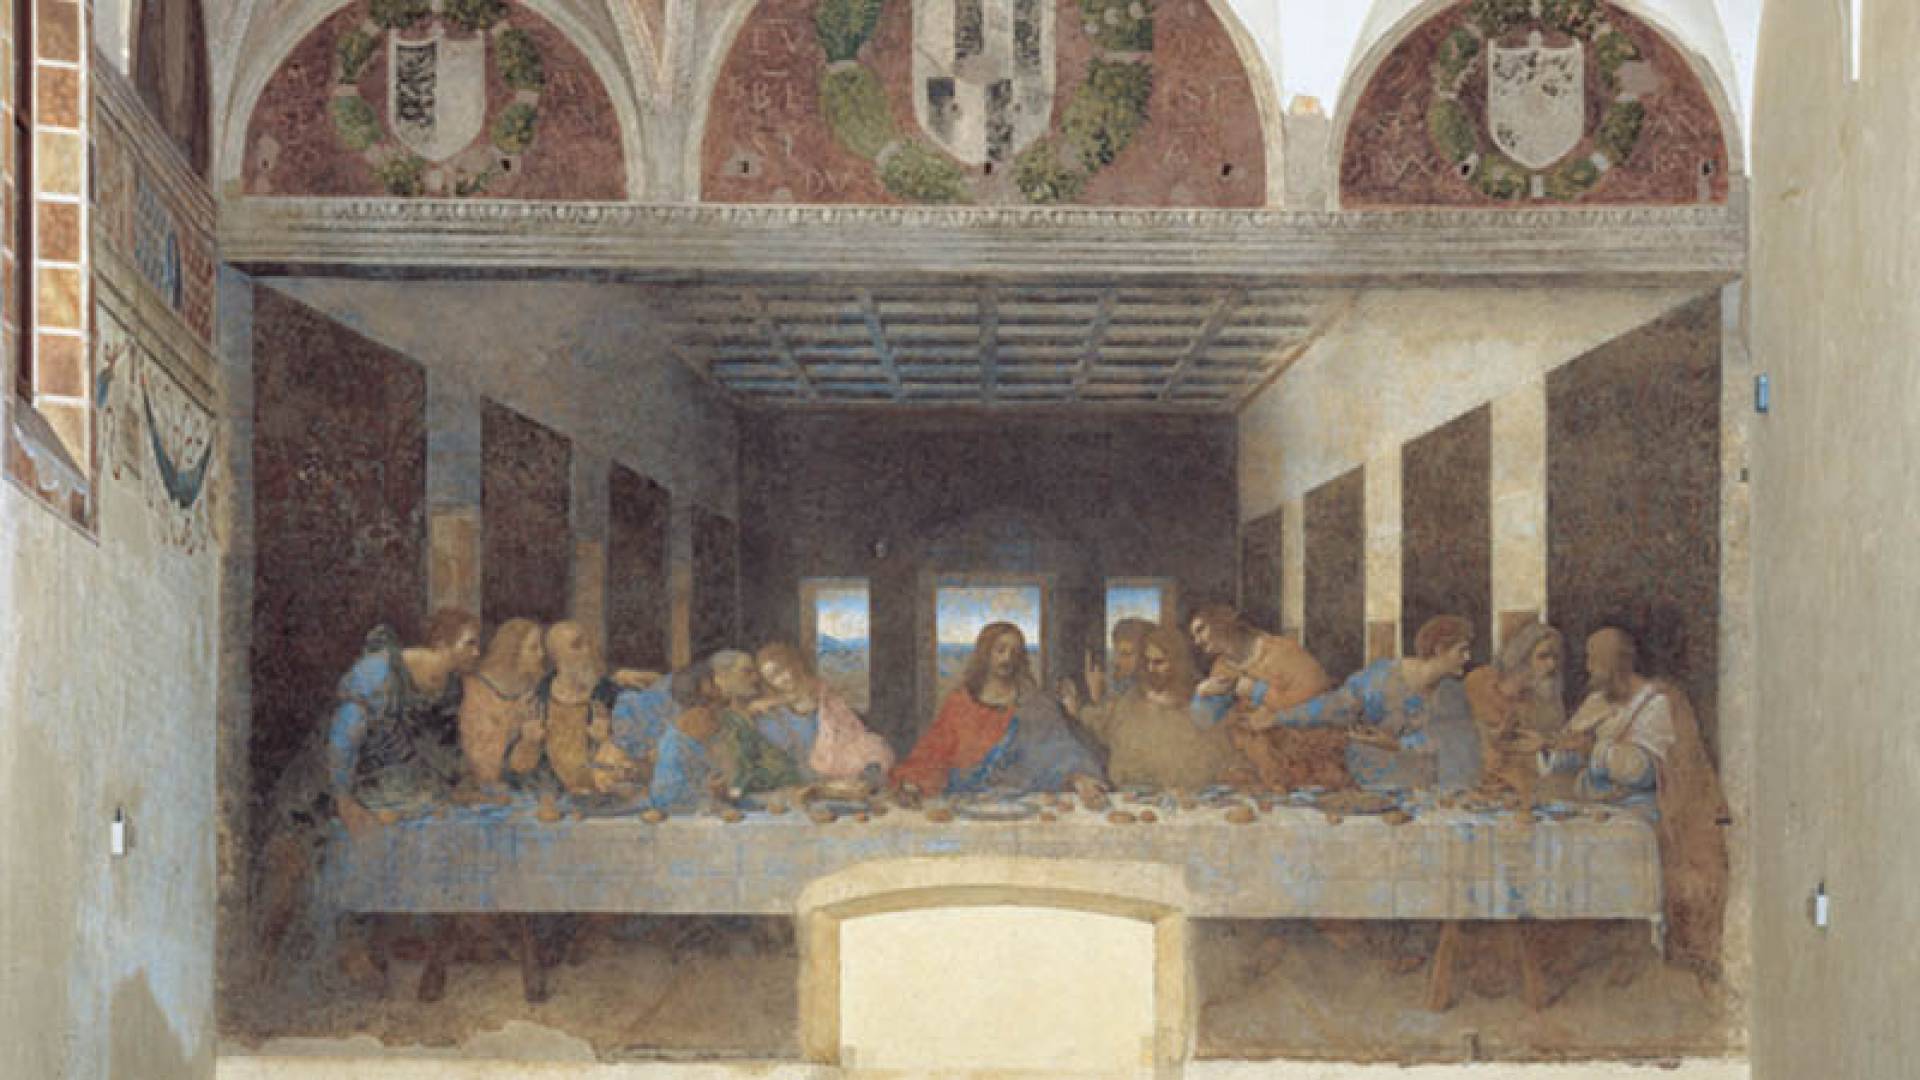 HOLY MARY OF GRACE - THE LAST SUPPER, The Last Supper - The Painting